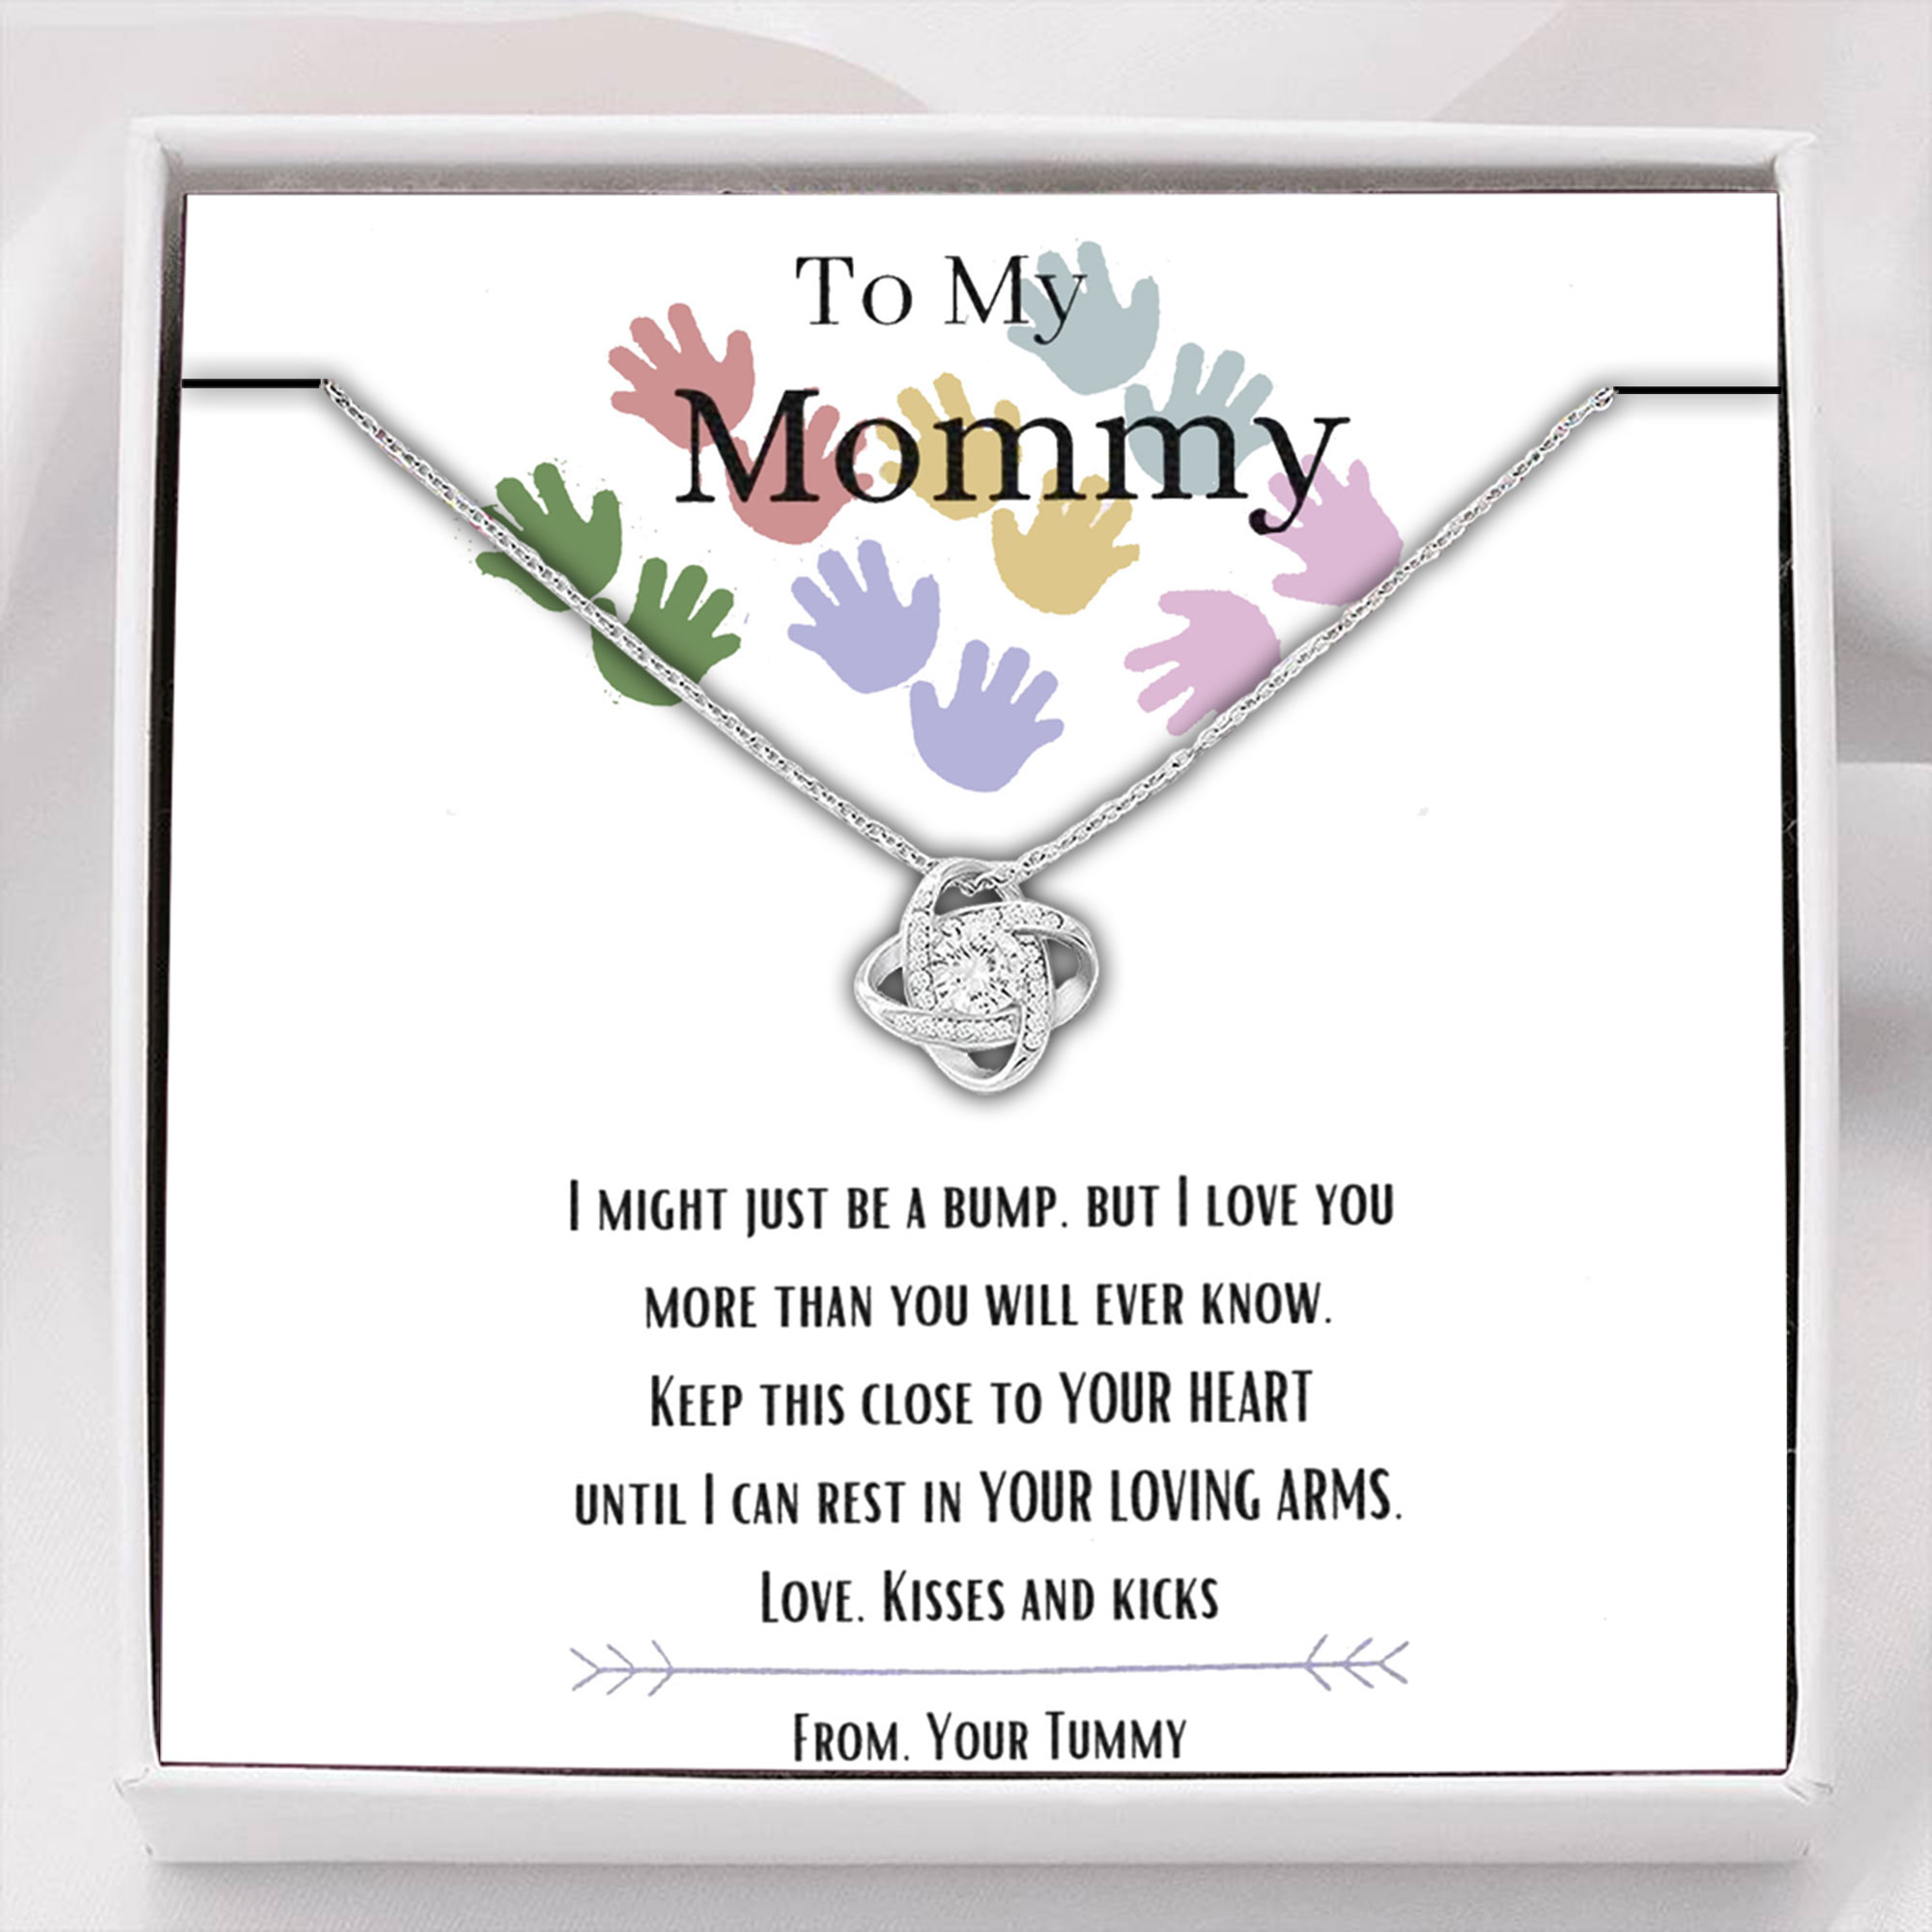 Mom Necklace, To My Mommy Necklace, I Love You, Baby Bump Gift, New Mom Gift